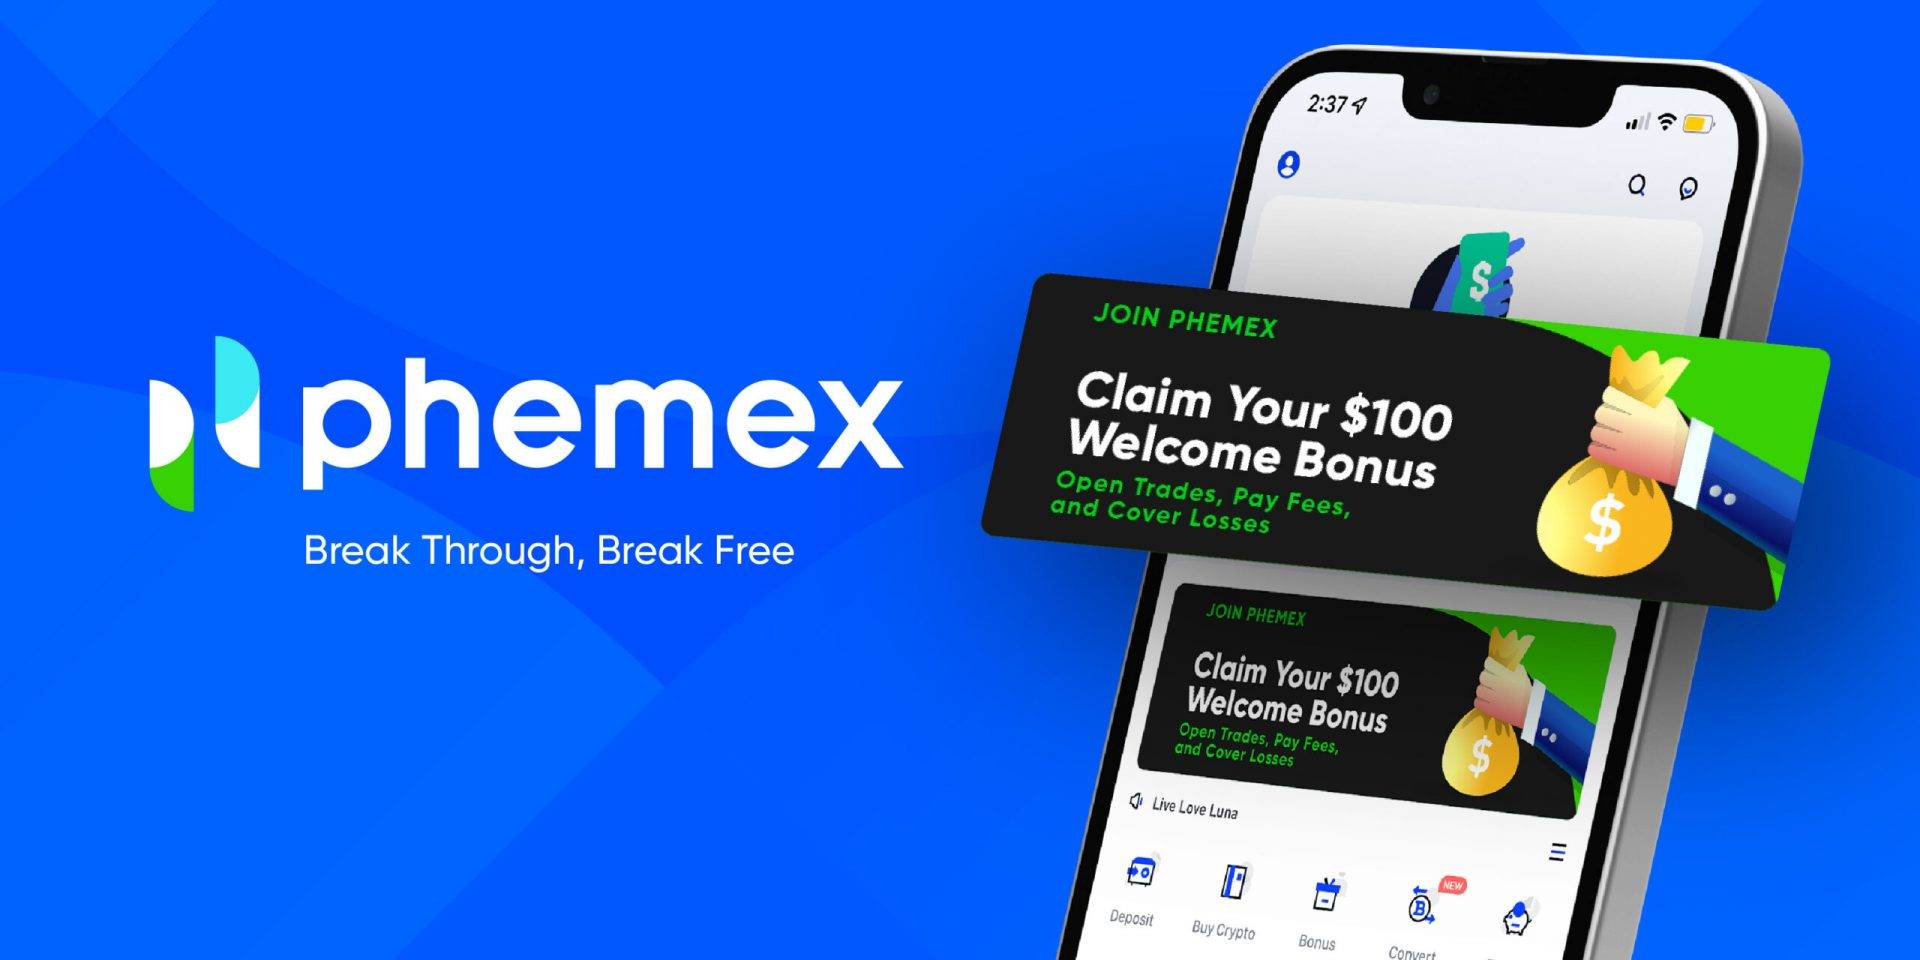 Phemex Mobile App Offers First Class Crypto Trading Even When You’re On The Go